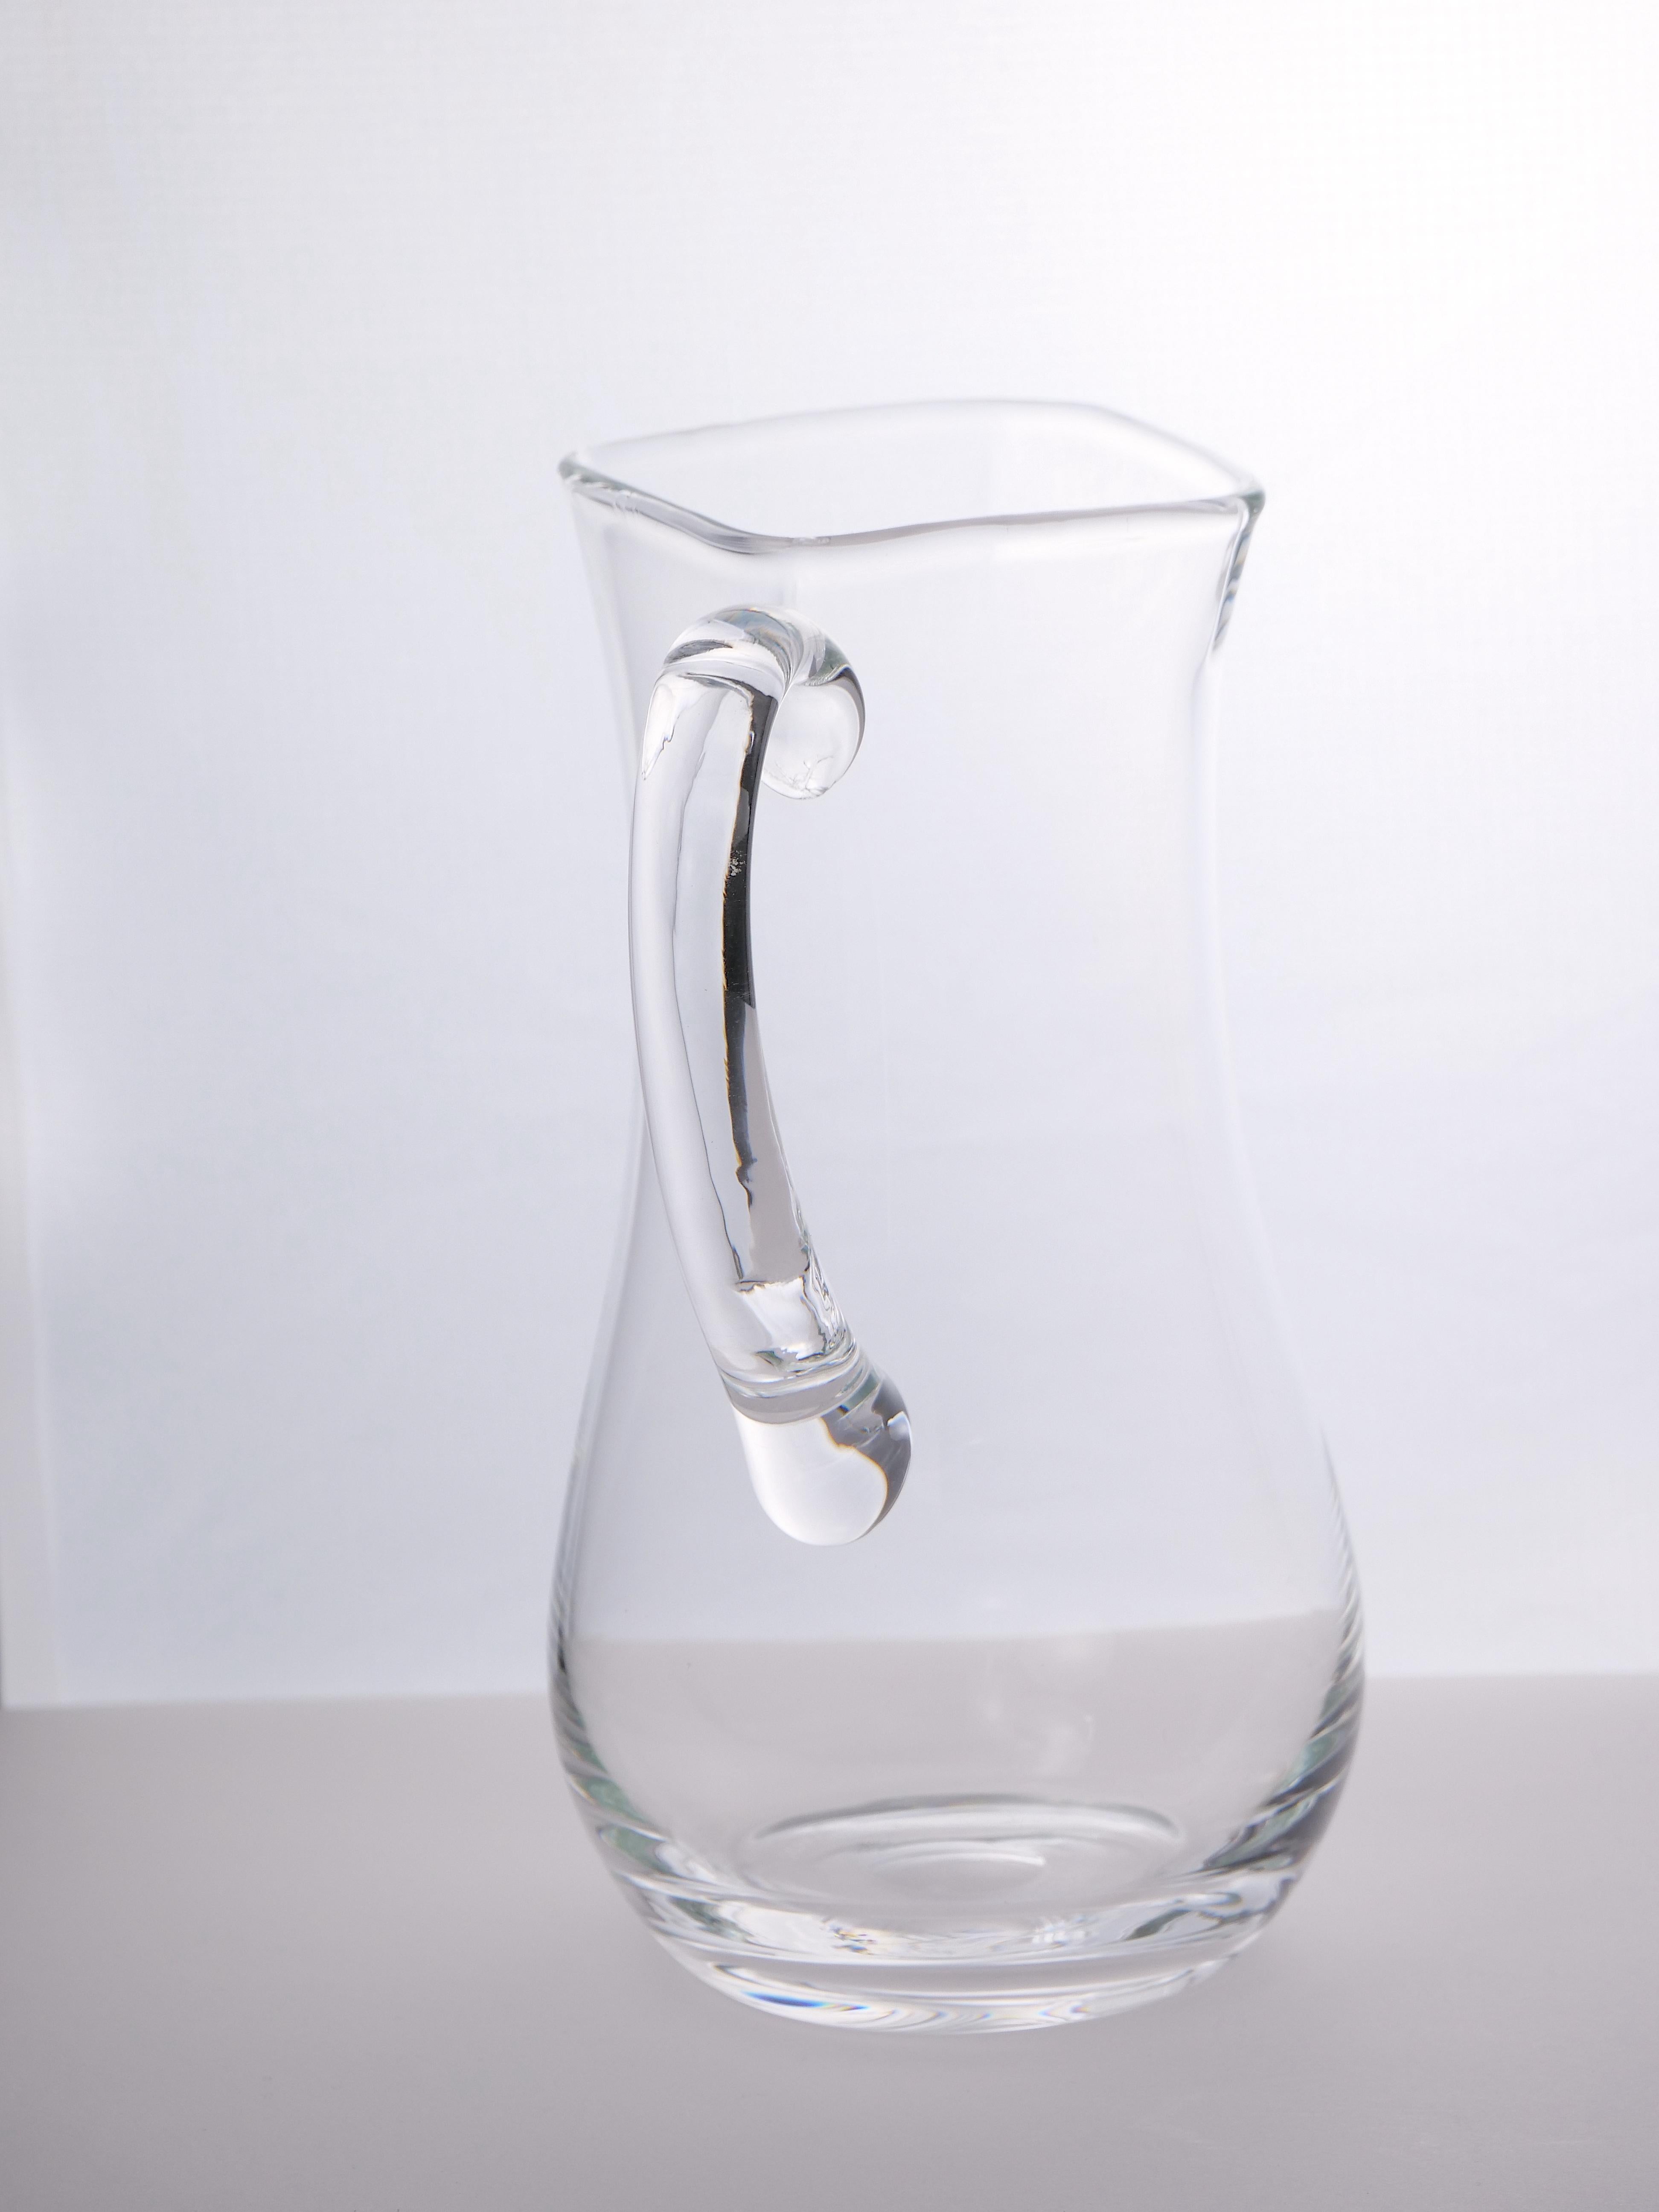 French Mid-Century Modern Crystal Barware / Tableware Serving Pitcher For Sale